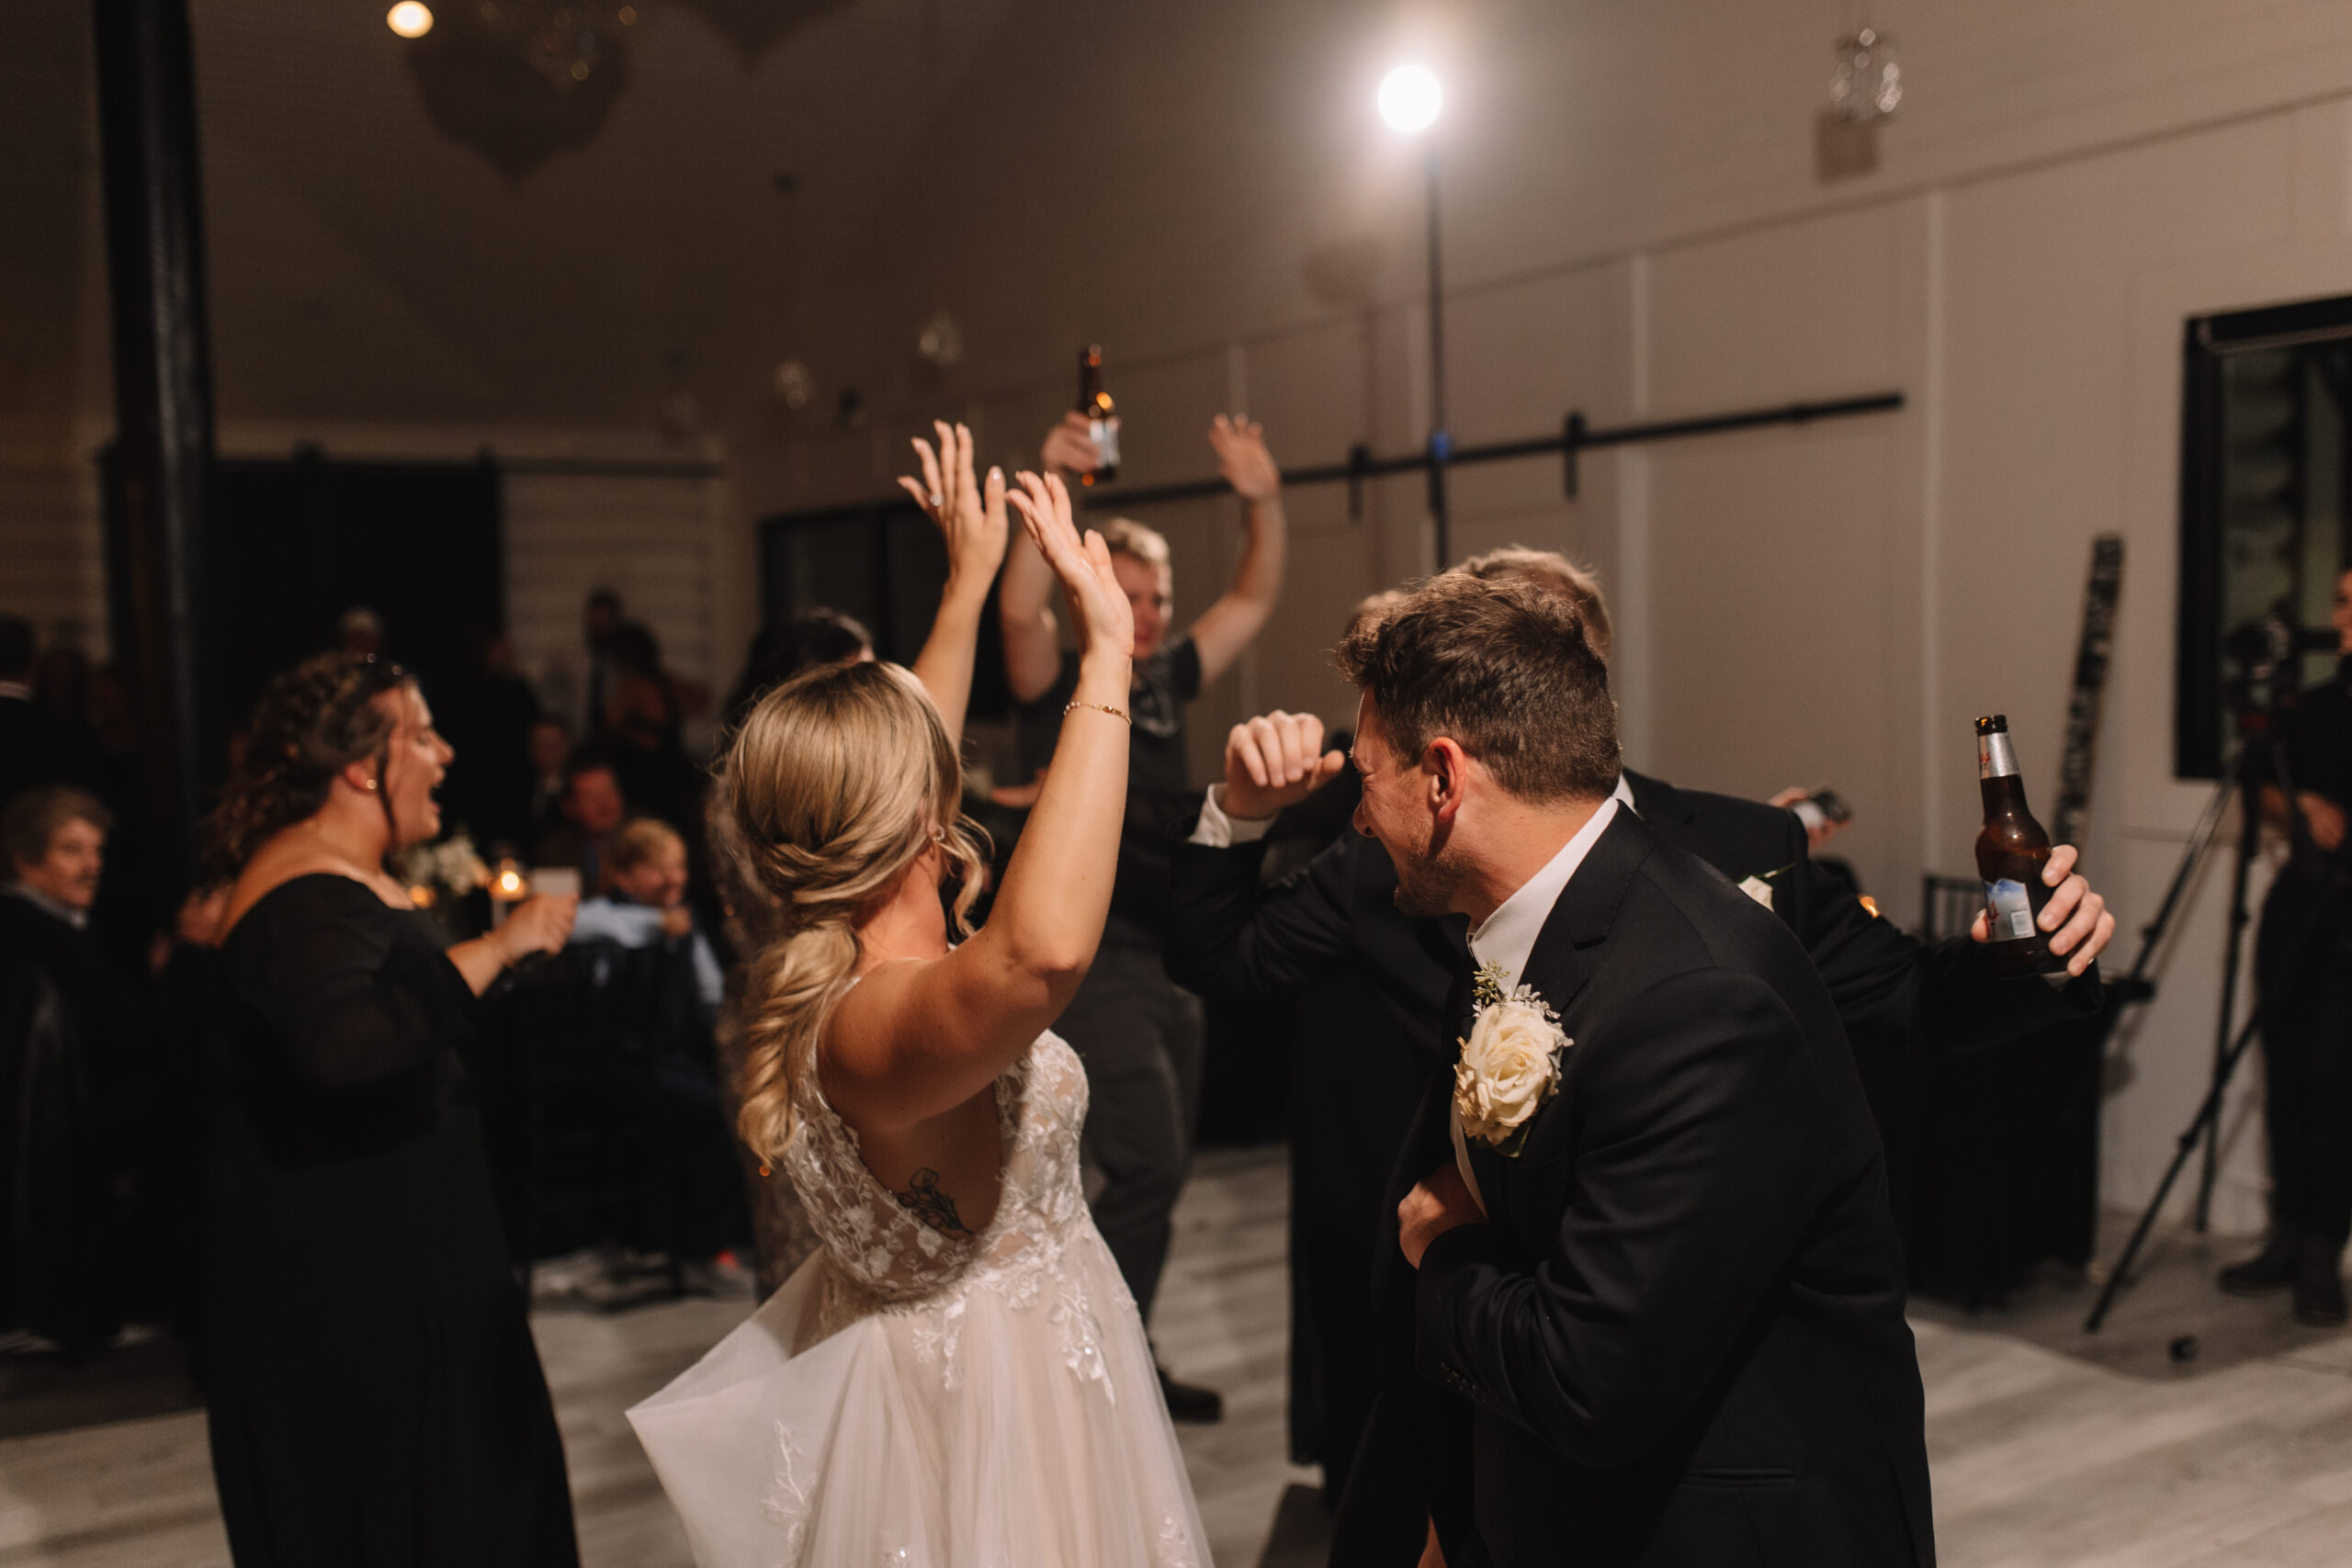 Bride and Groom Dancing together on the dance floor with guests